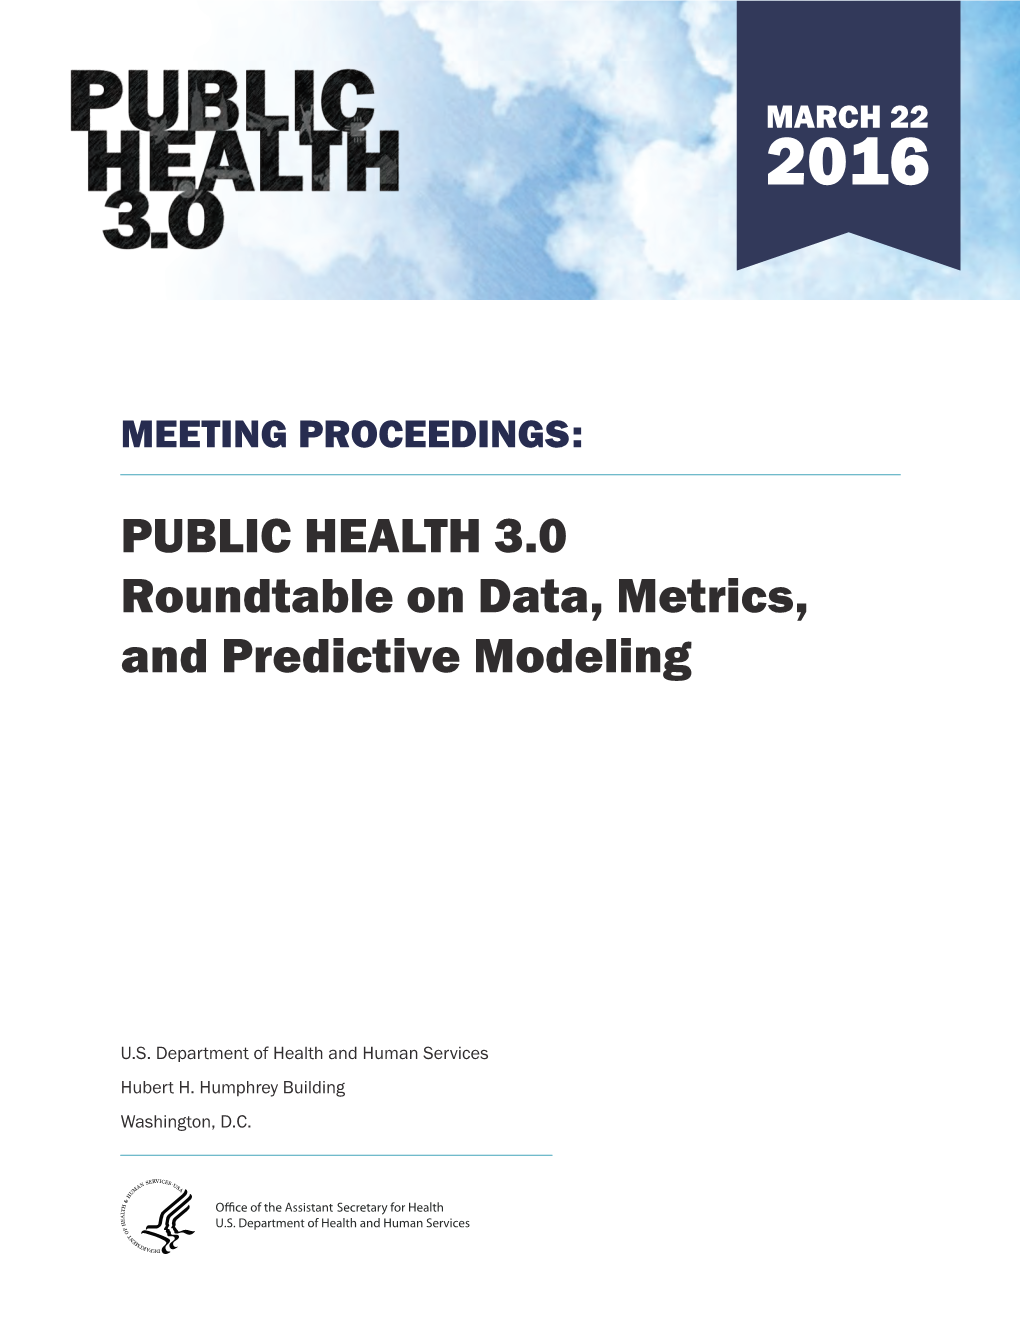 PUBLIC HEALTH 3.0 Roundtable on Data, Metrics, and Predictive Modeling